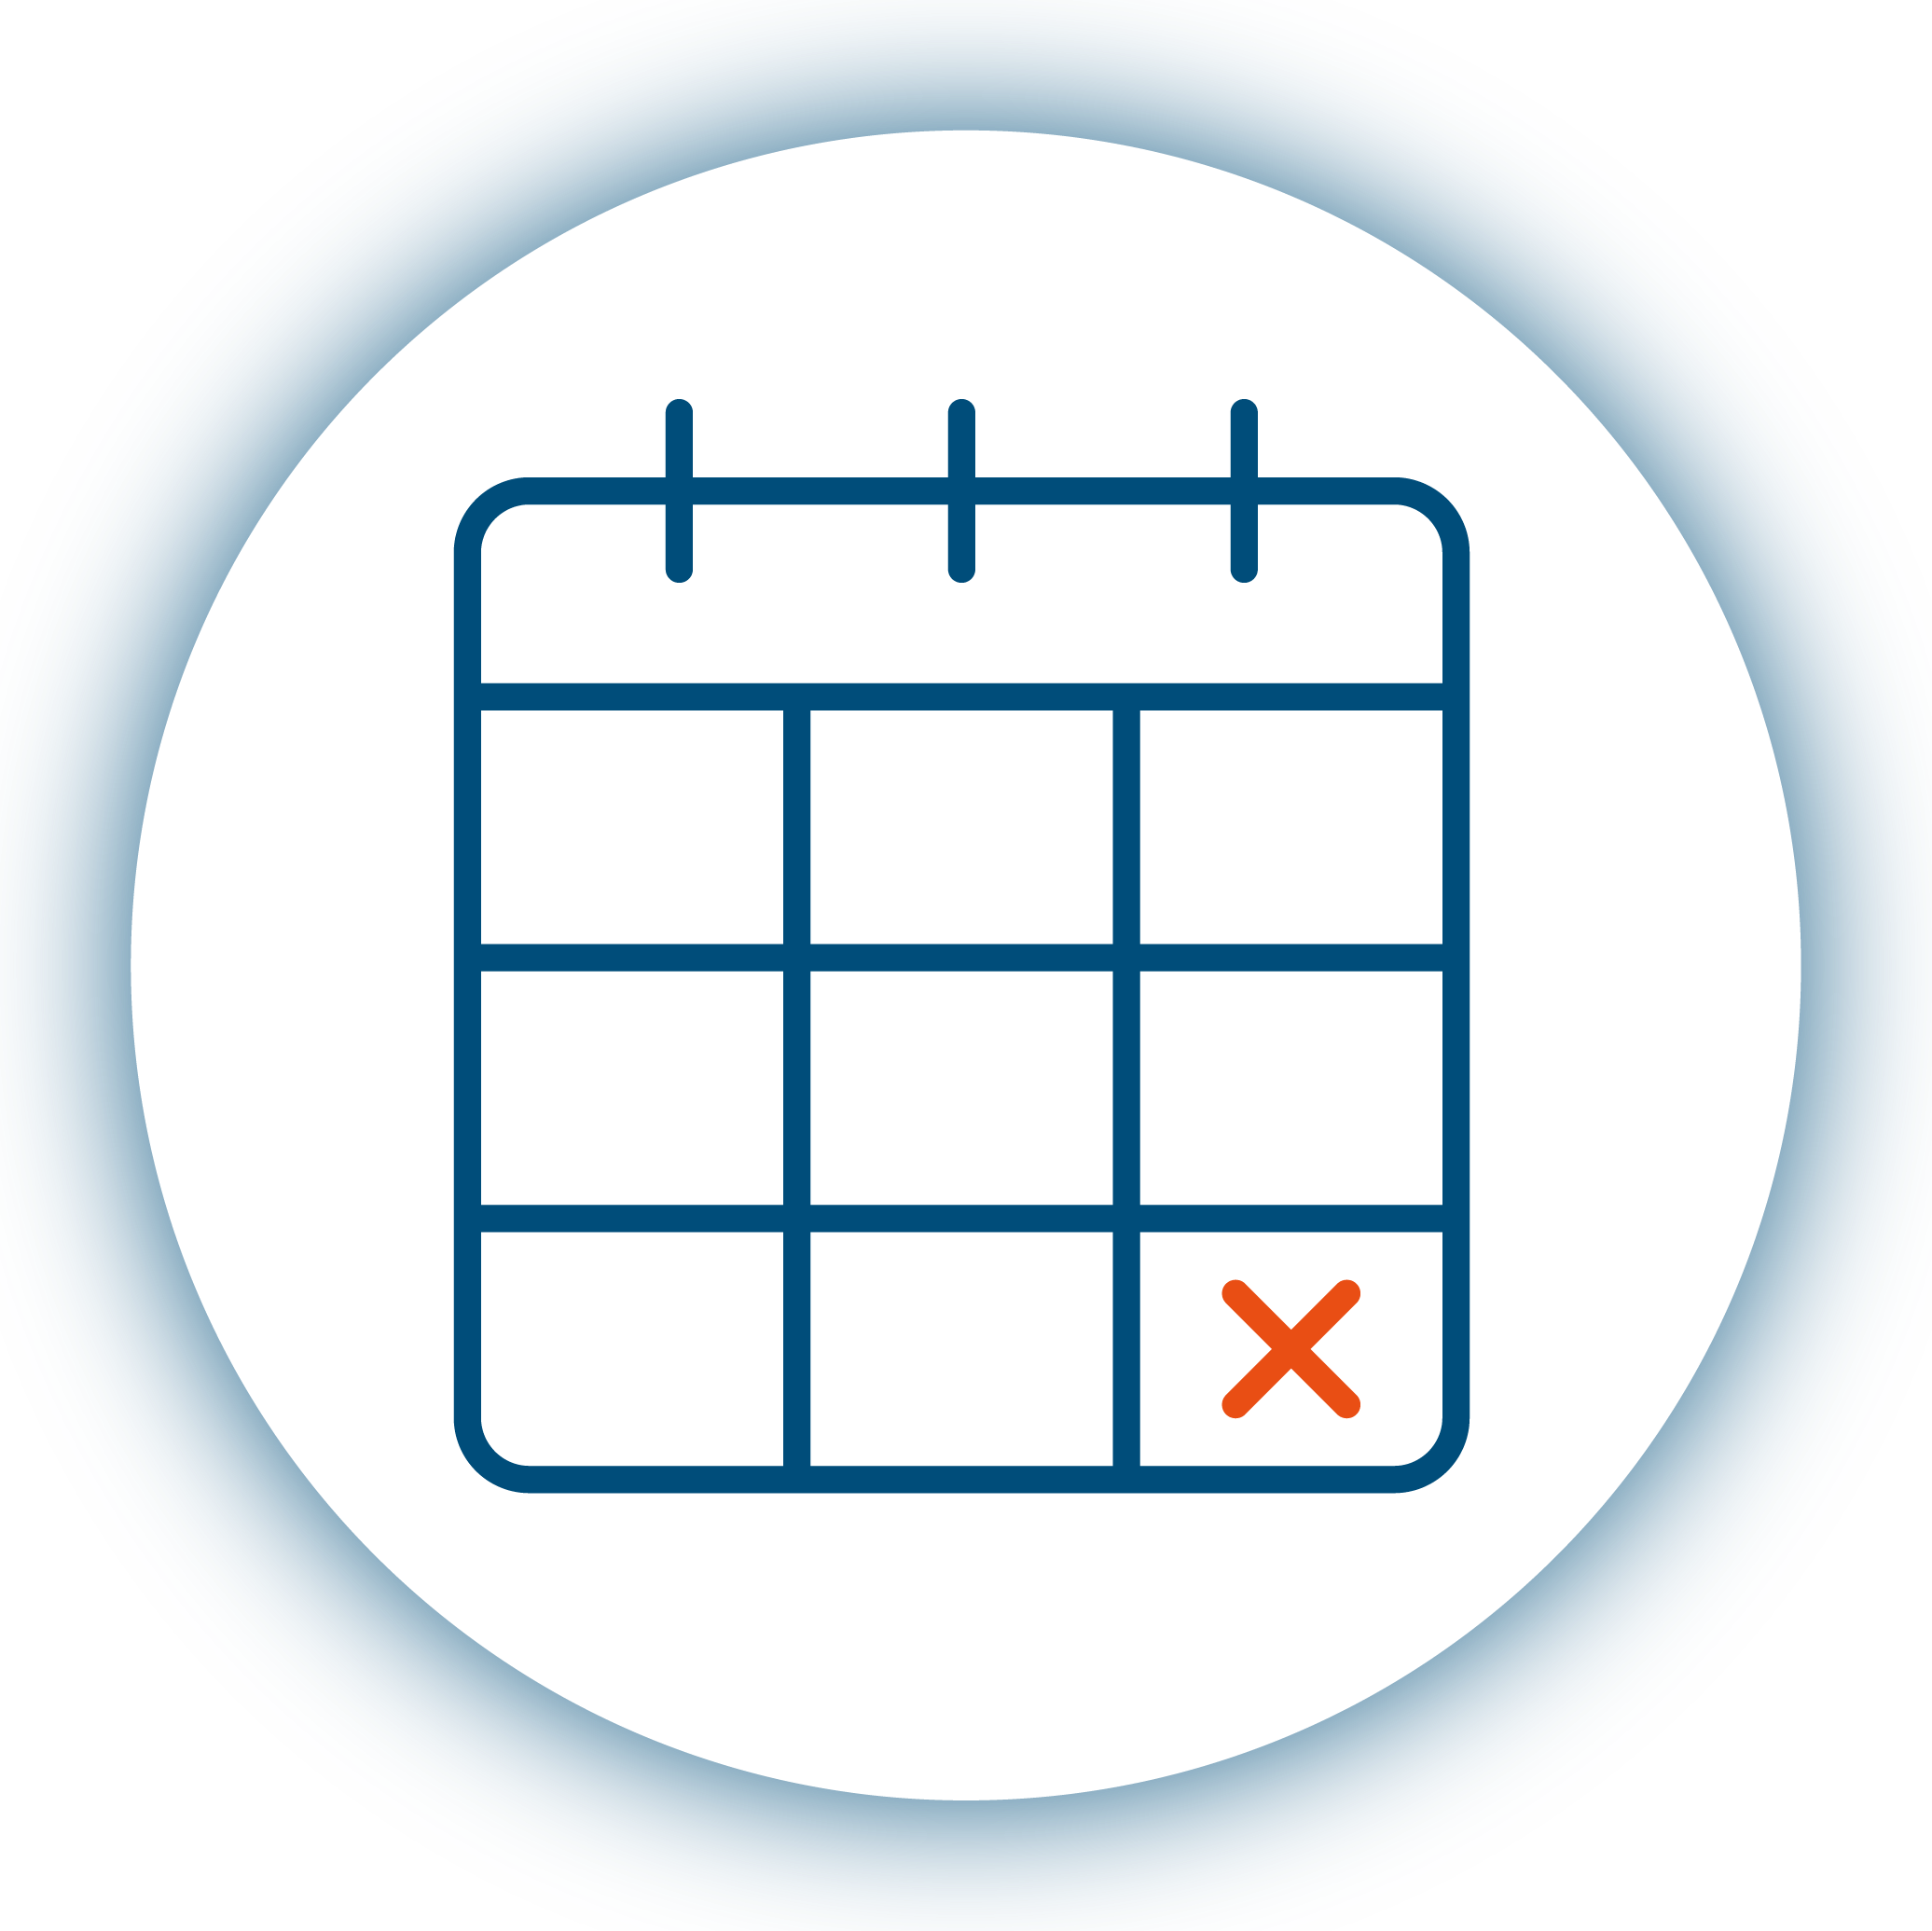 Pay Monthly Calendar Icon with Red Cross suggesting payment date